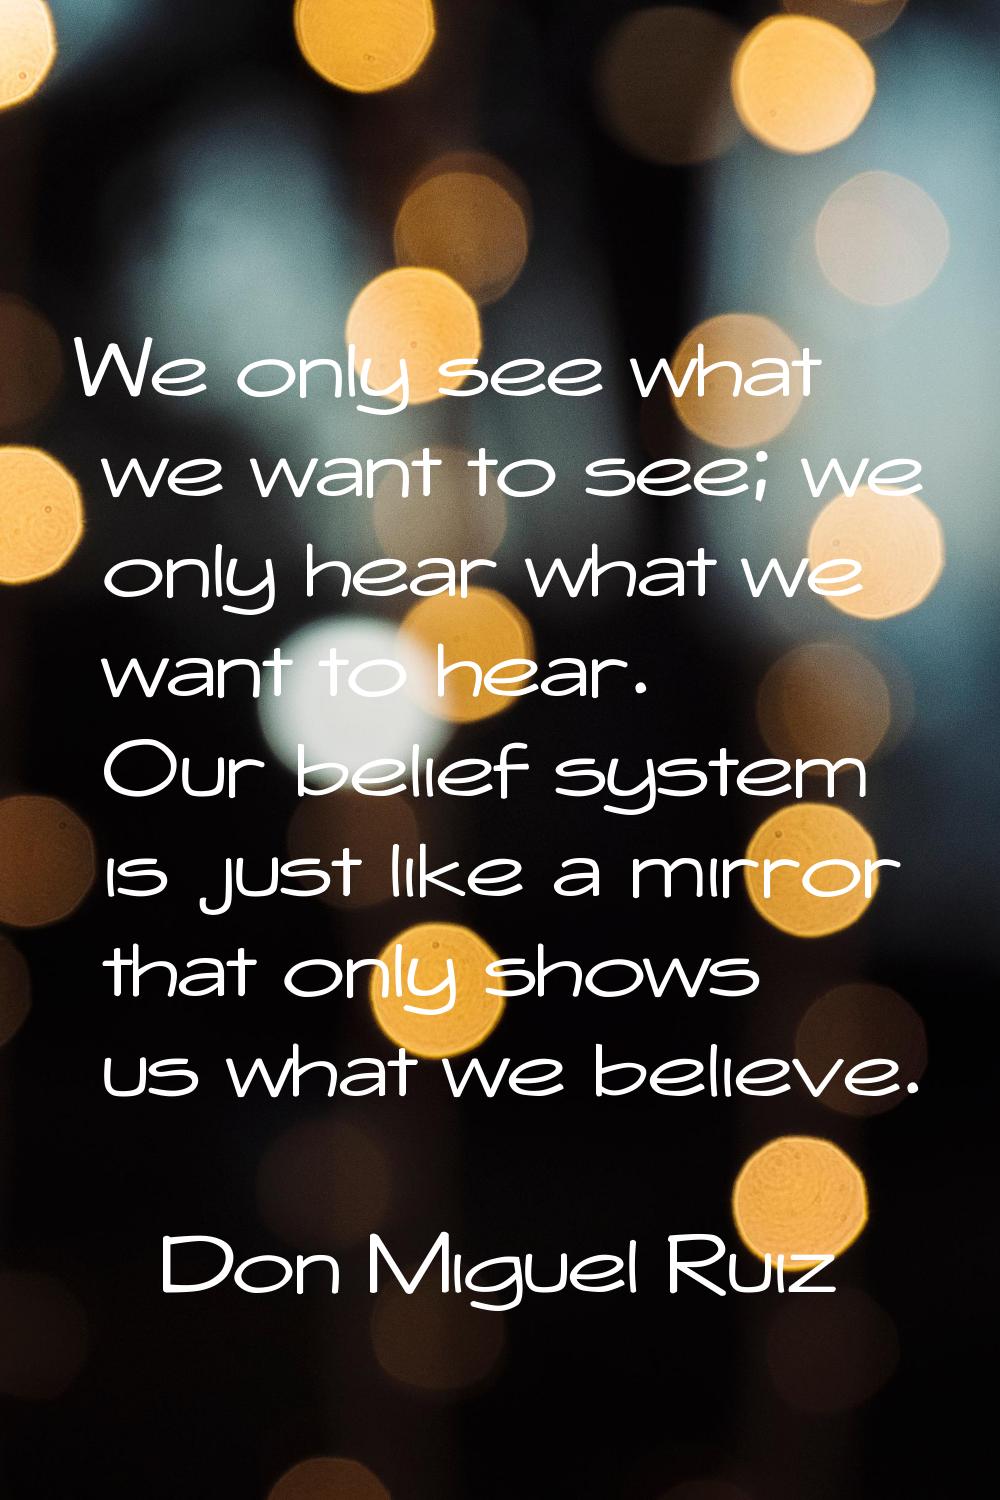 We only see what we want to see; we only hear what we want to hear. Our belief system is just like 